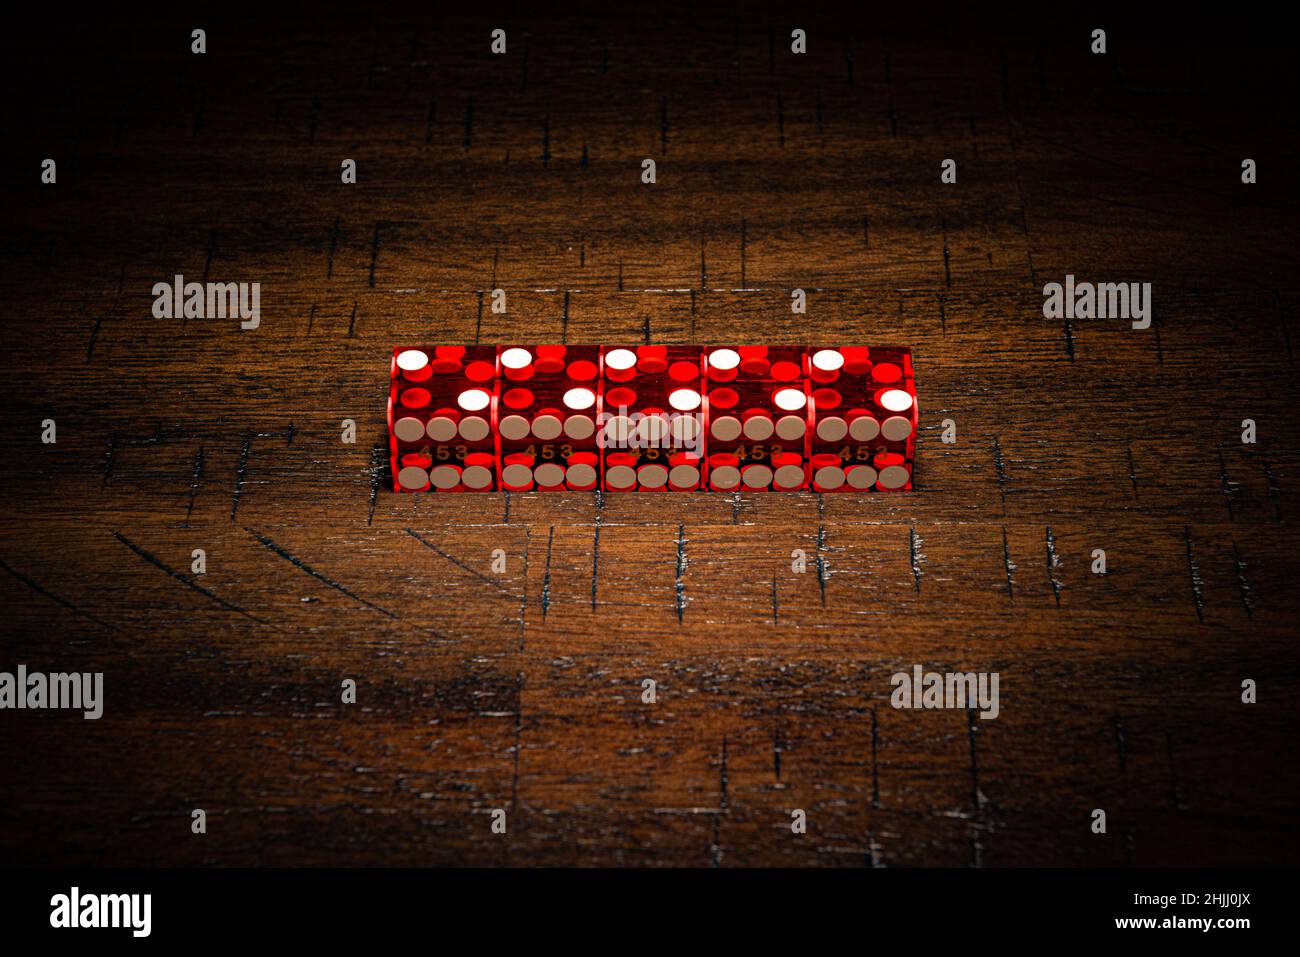 Professional casino-style dice on a wooden table under high-key lighting. Stock Photo